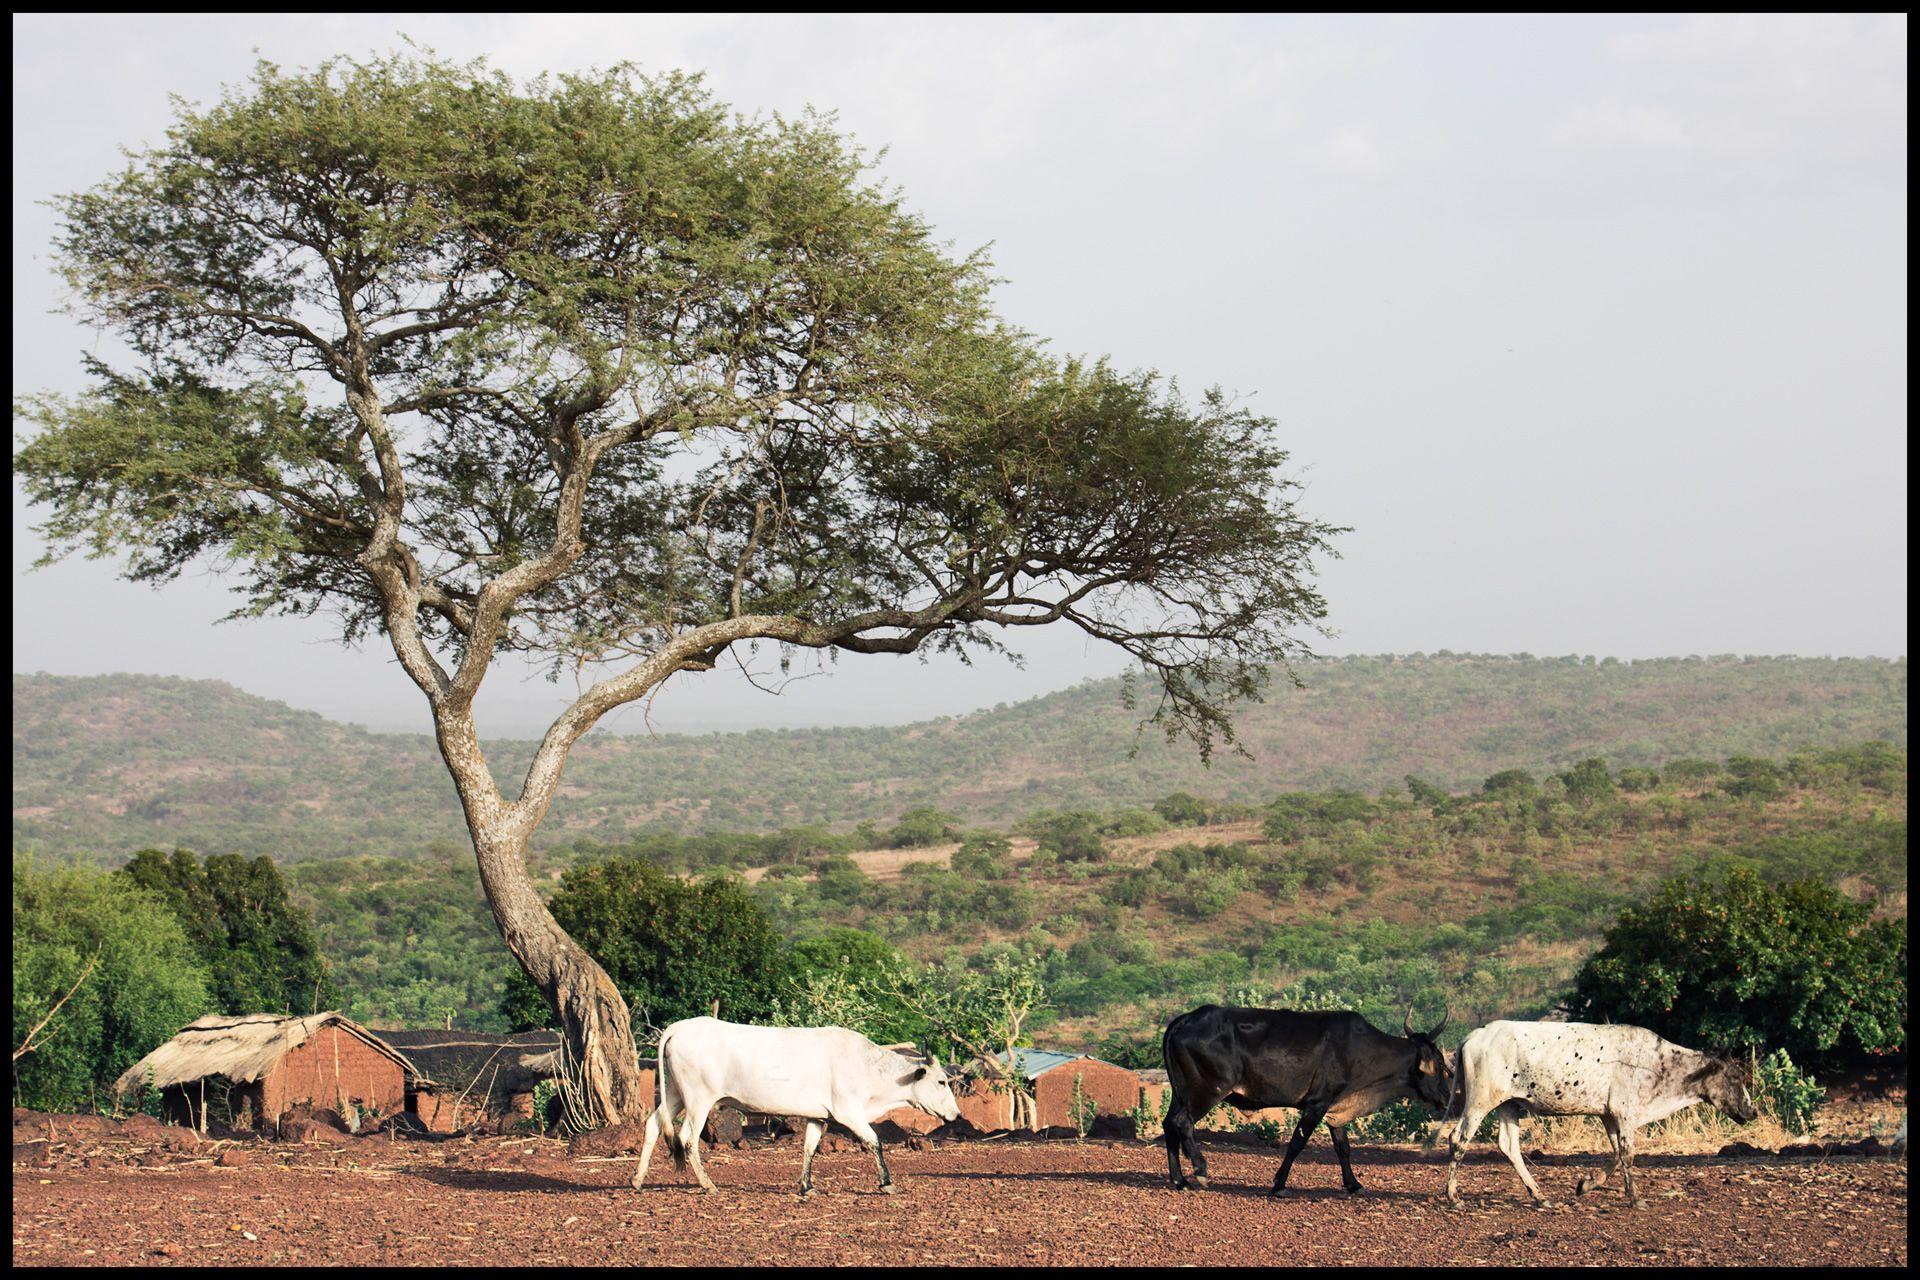 HD cows in burkina faso Wallpaper Post has been published